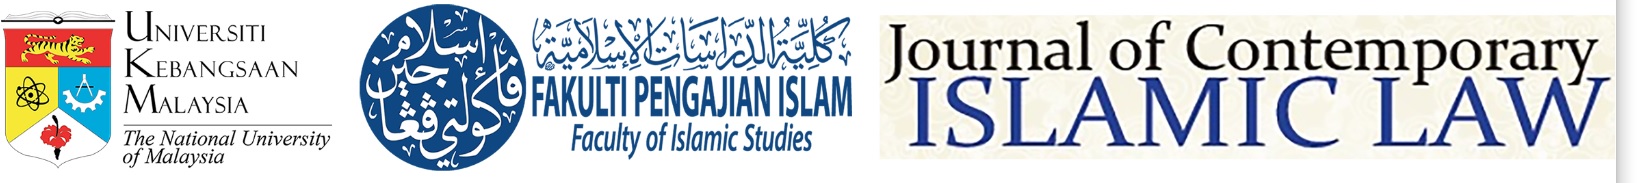 Journal of Contemporary Islamic Law